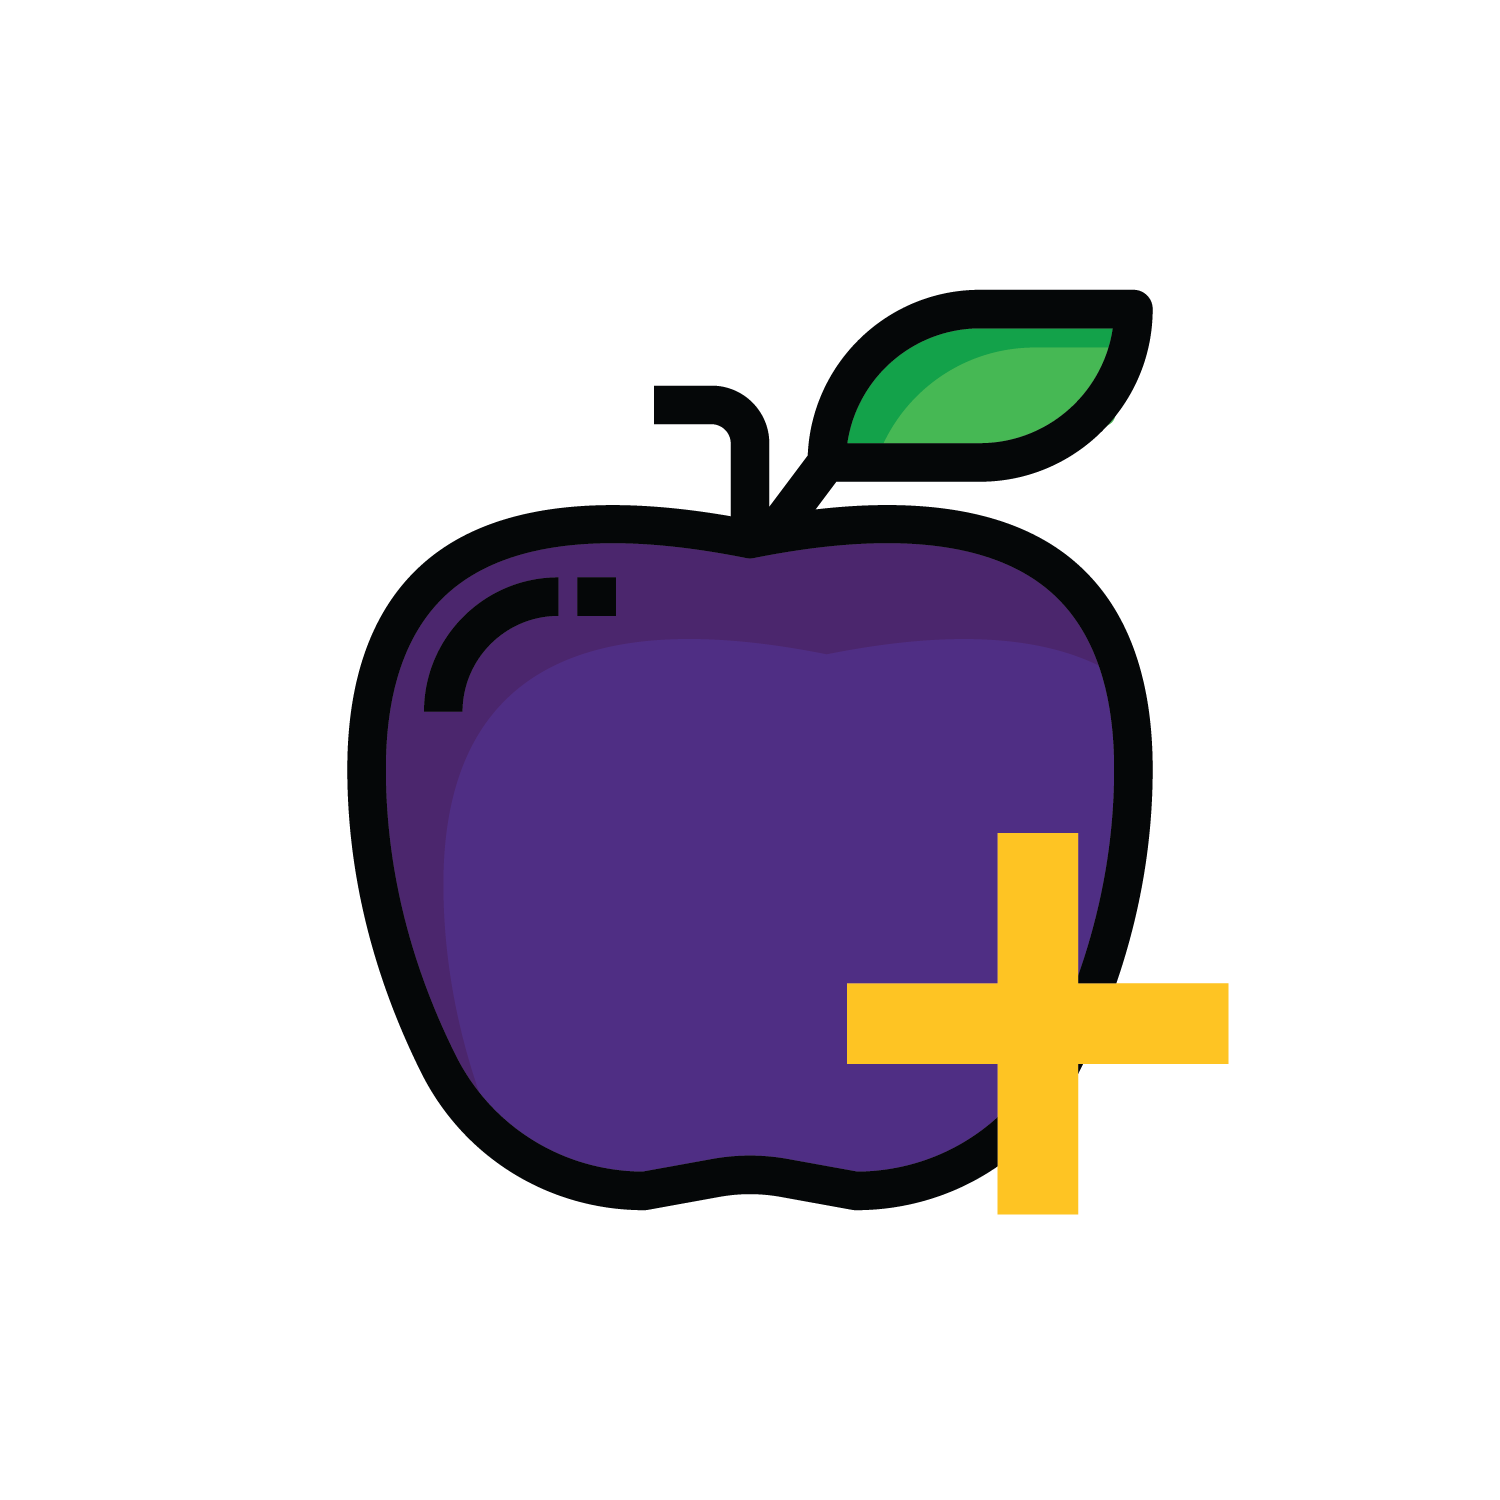 Purple cartoon apple with a plus sign depicting food availability